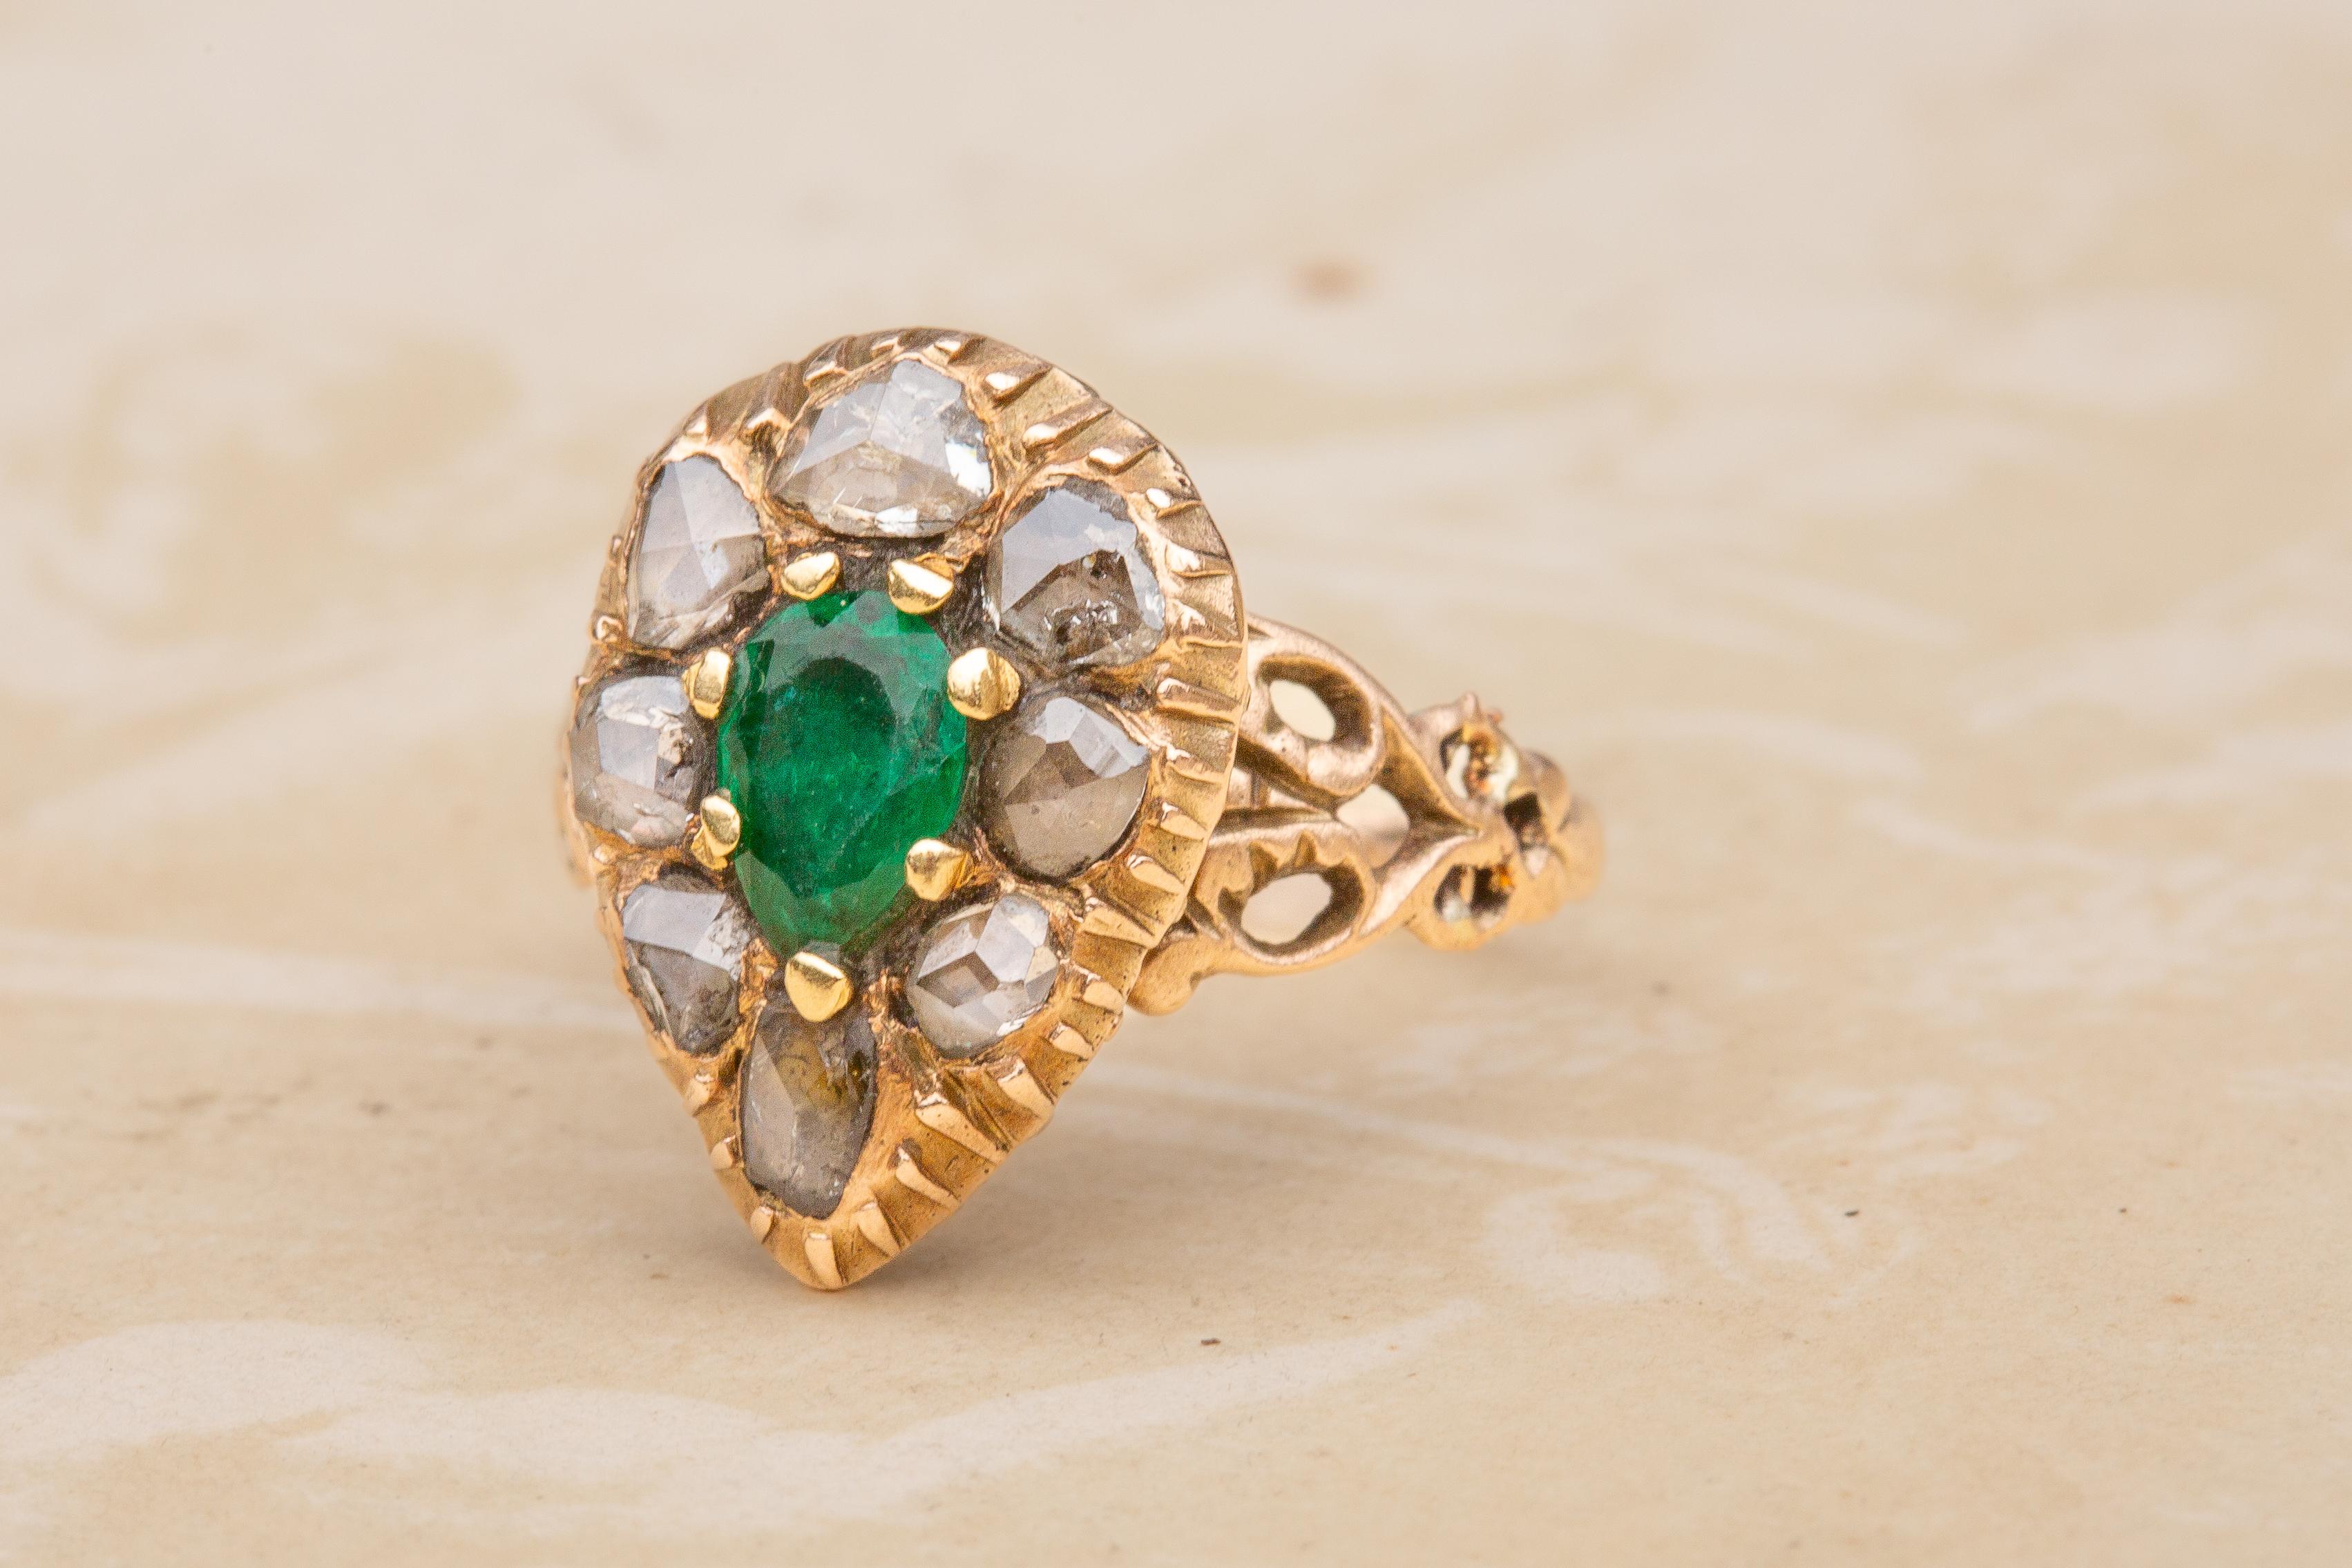 A gorgeous antique emerald and diamond ring dating to the 19th century. The central prong-set 0.3ct pear cut natural emerald displays a gorgeous lush green hue and great saturation. It is surrounded by a halo of rose cut diamonds in closed-back and